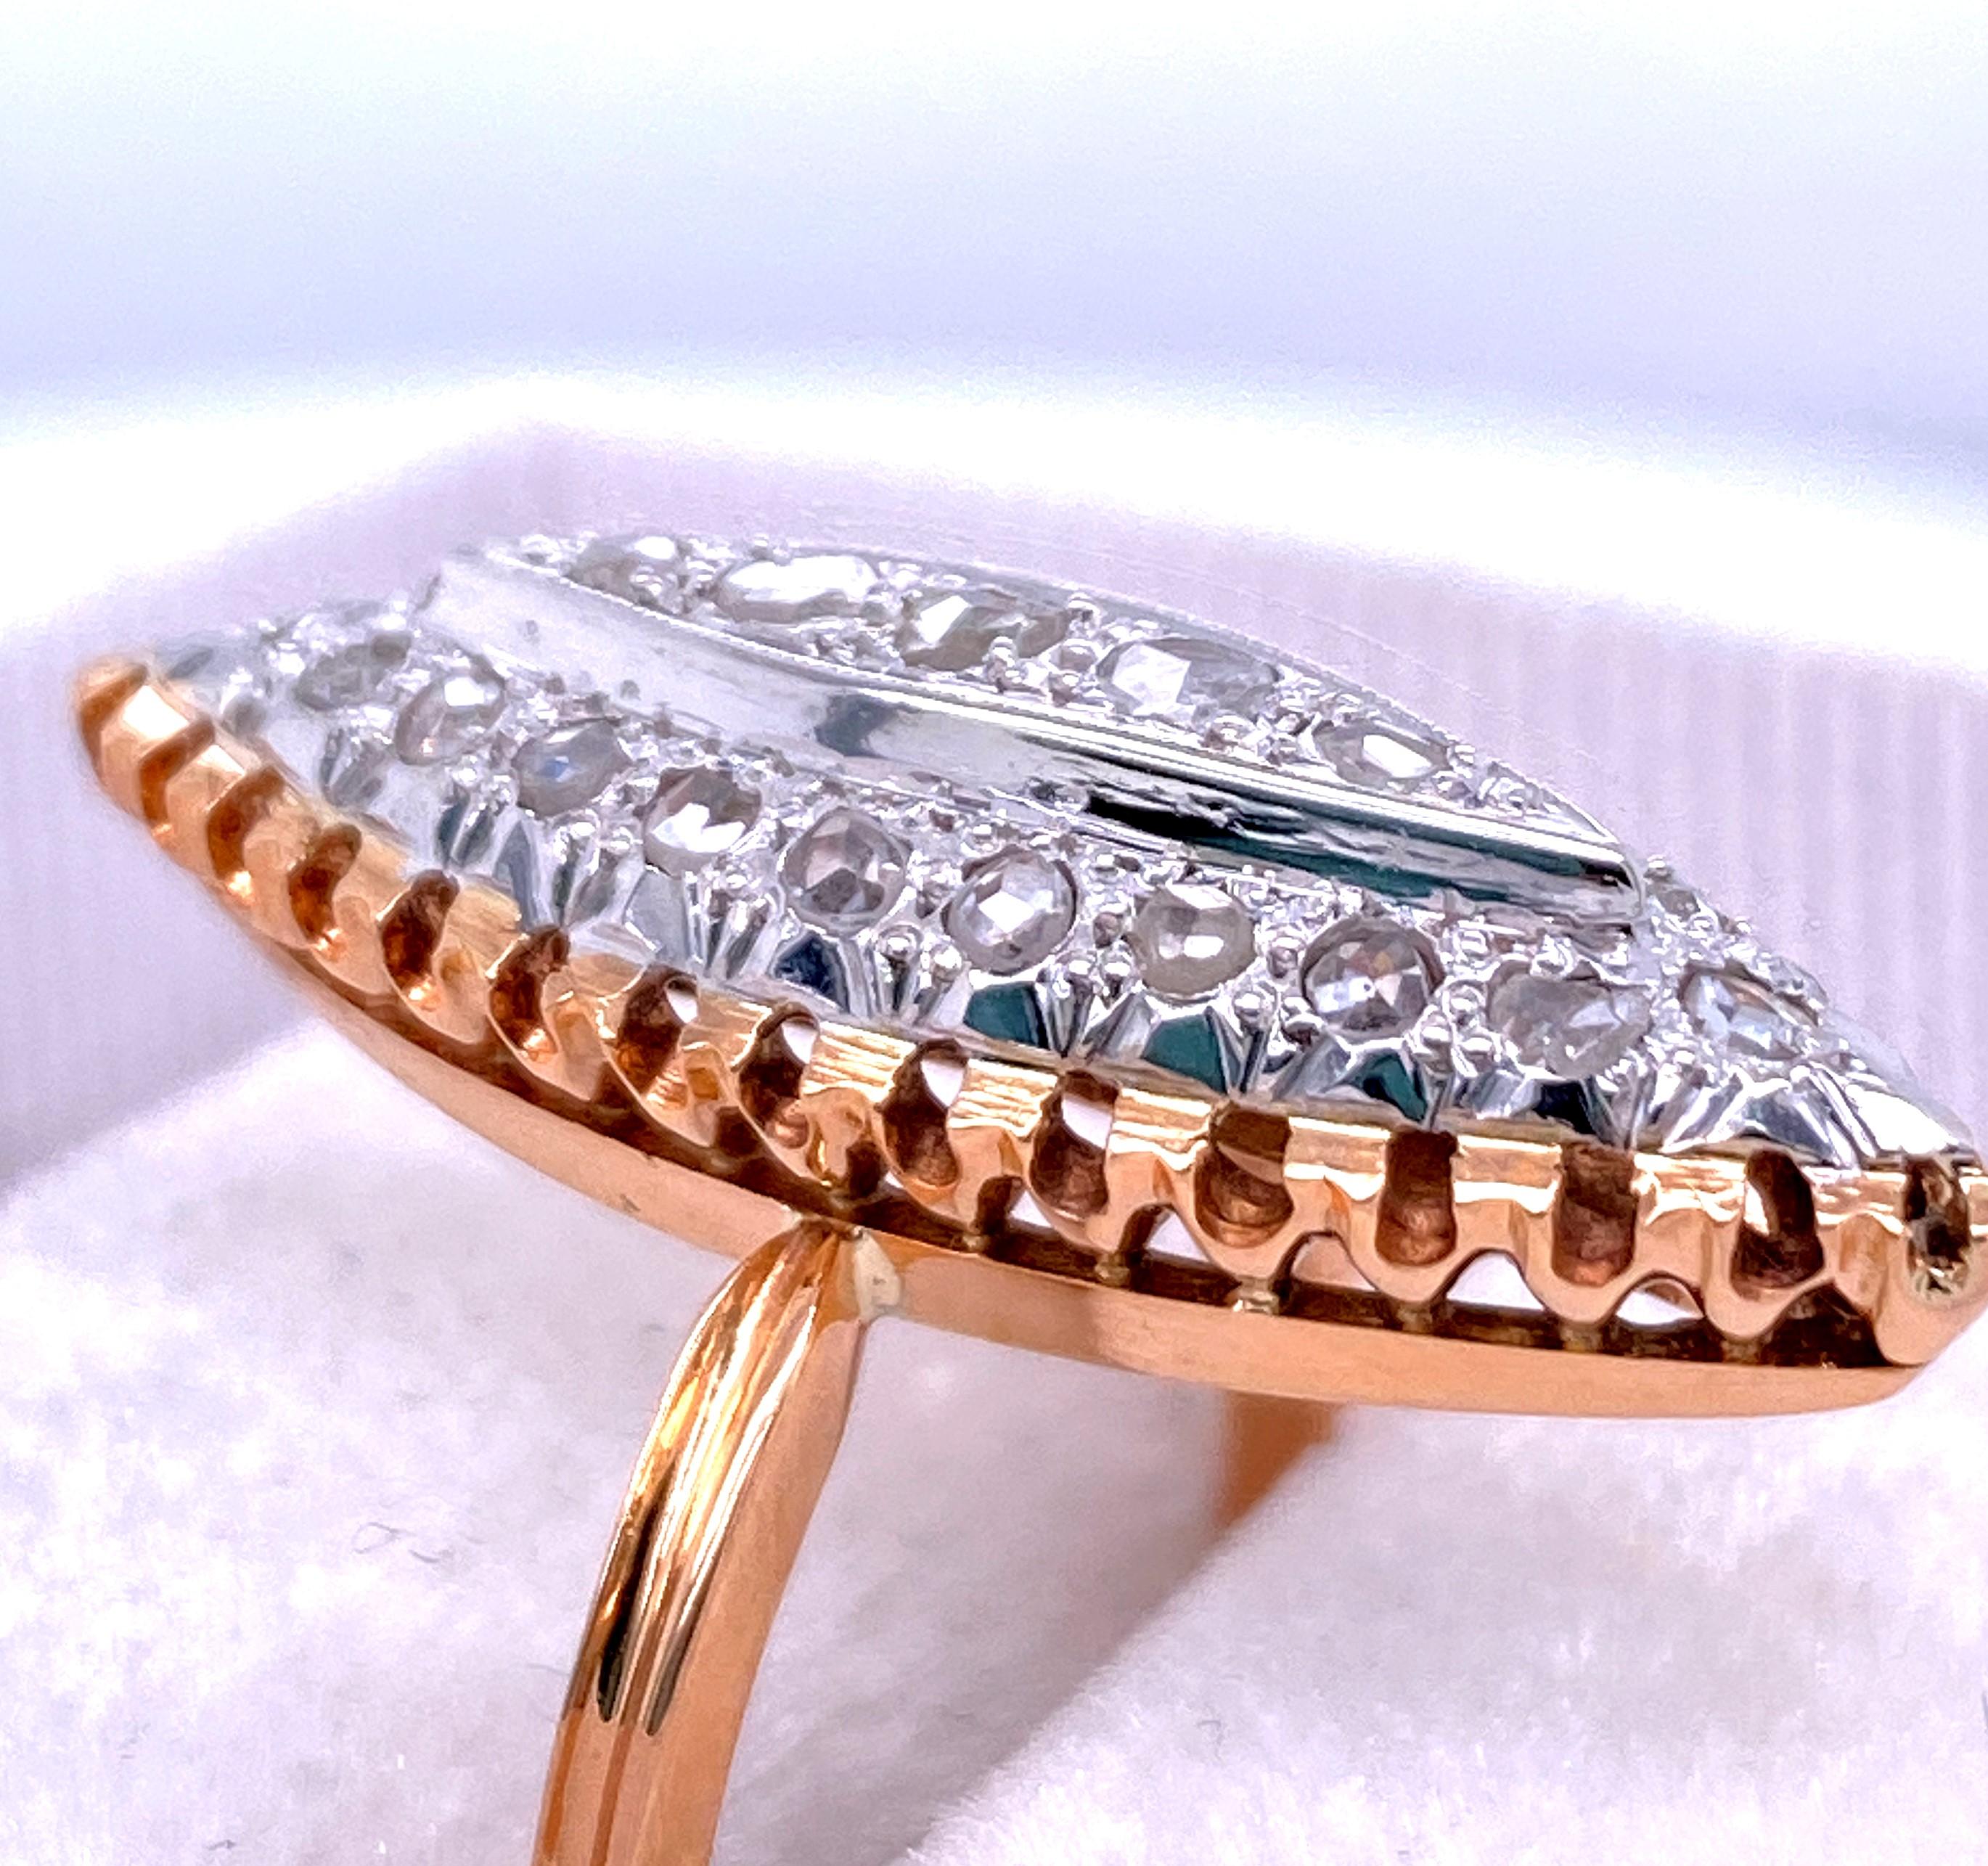 One 18 karat yellow and white gold (stamped K18) marquise shaped ring pave set with twenty-five native cut diamonds with J-L color and SI2/I1 clarity. The top measures 28mm x 10mm and the yellow gold shank tapers from 1.9mm to 1.36mm. The ring is a